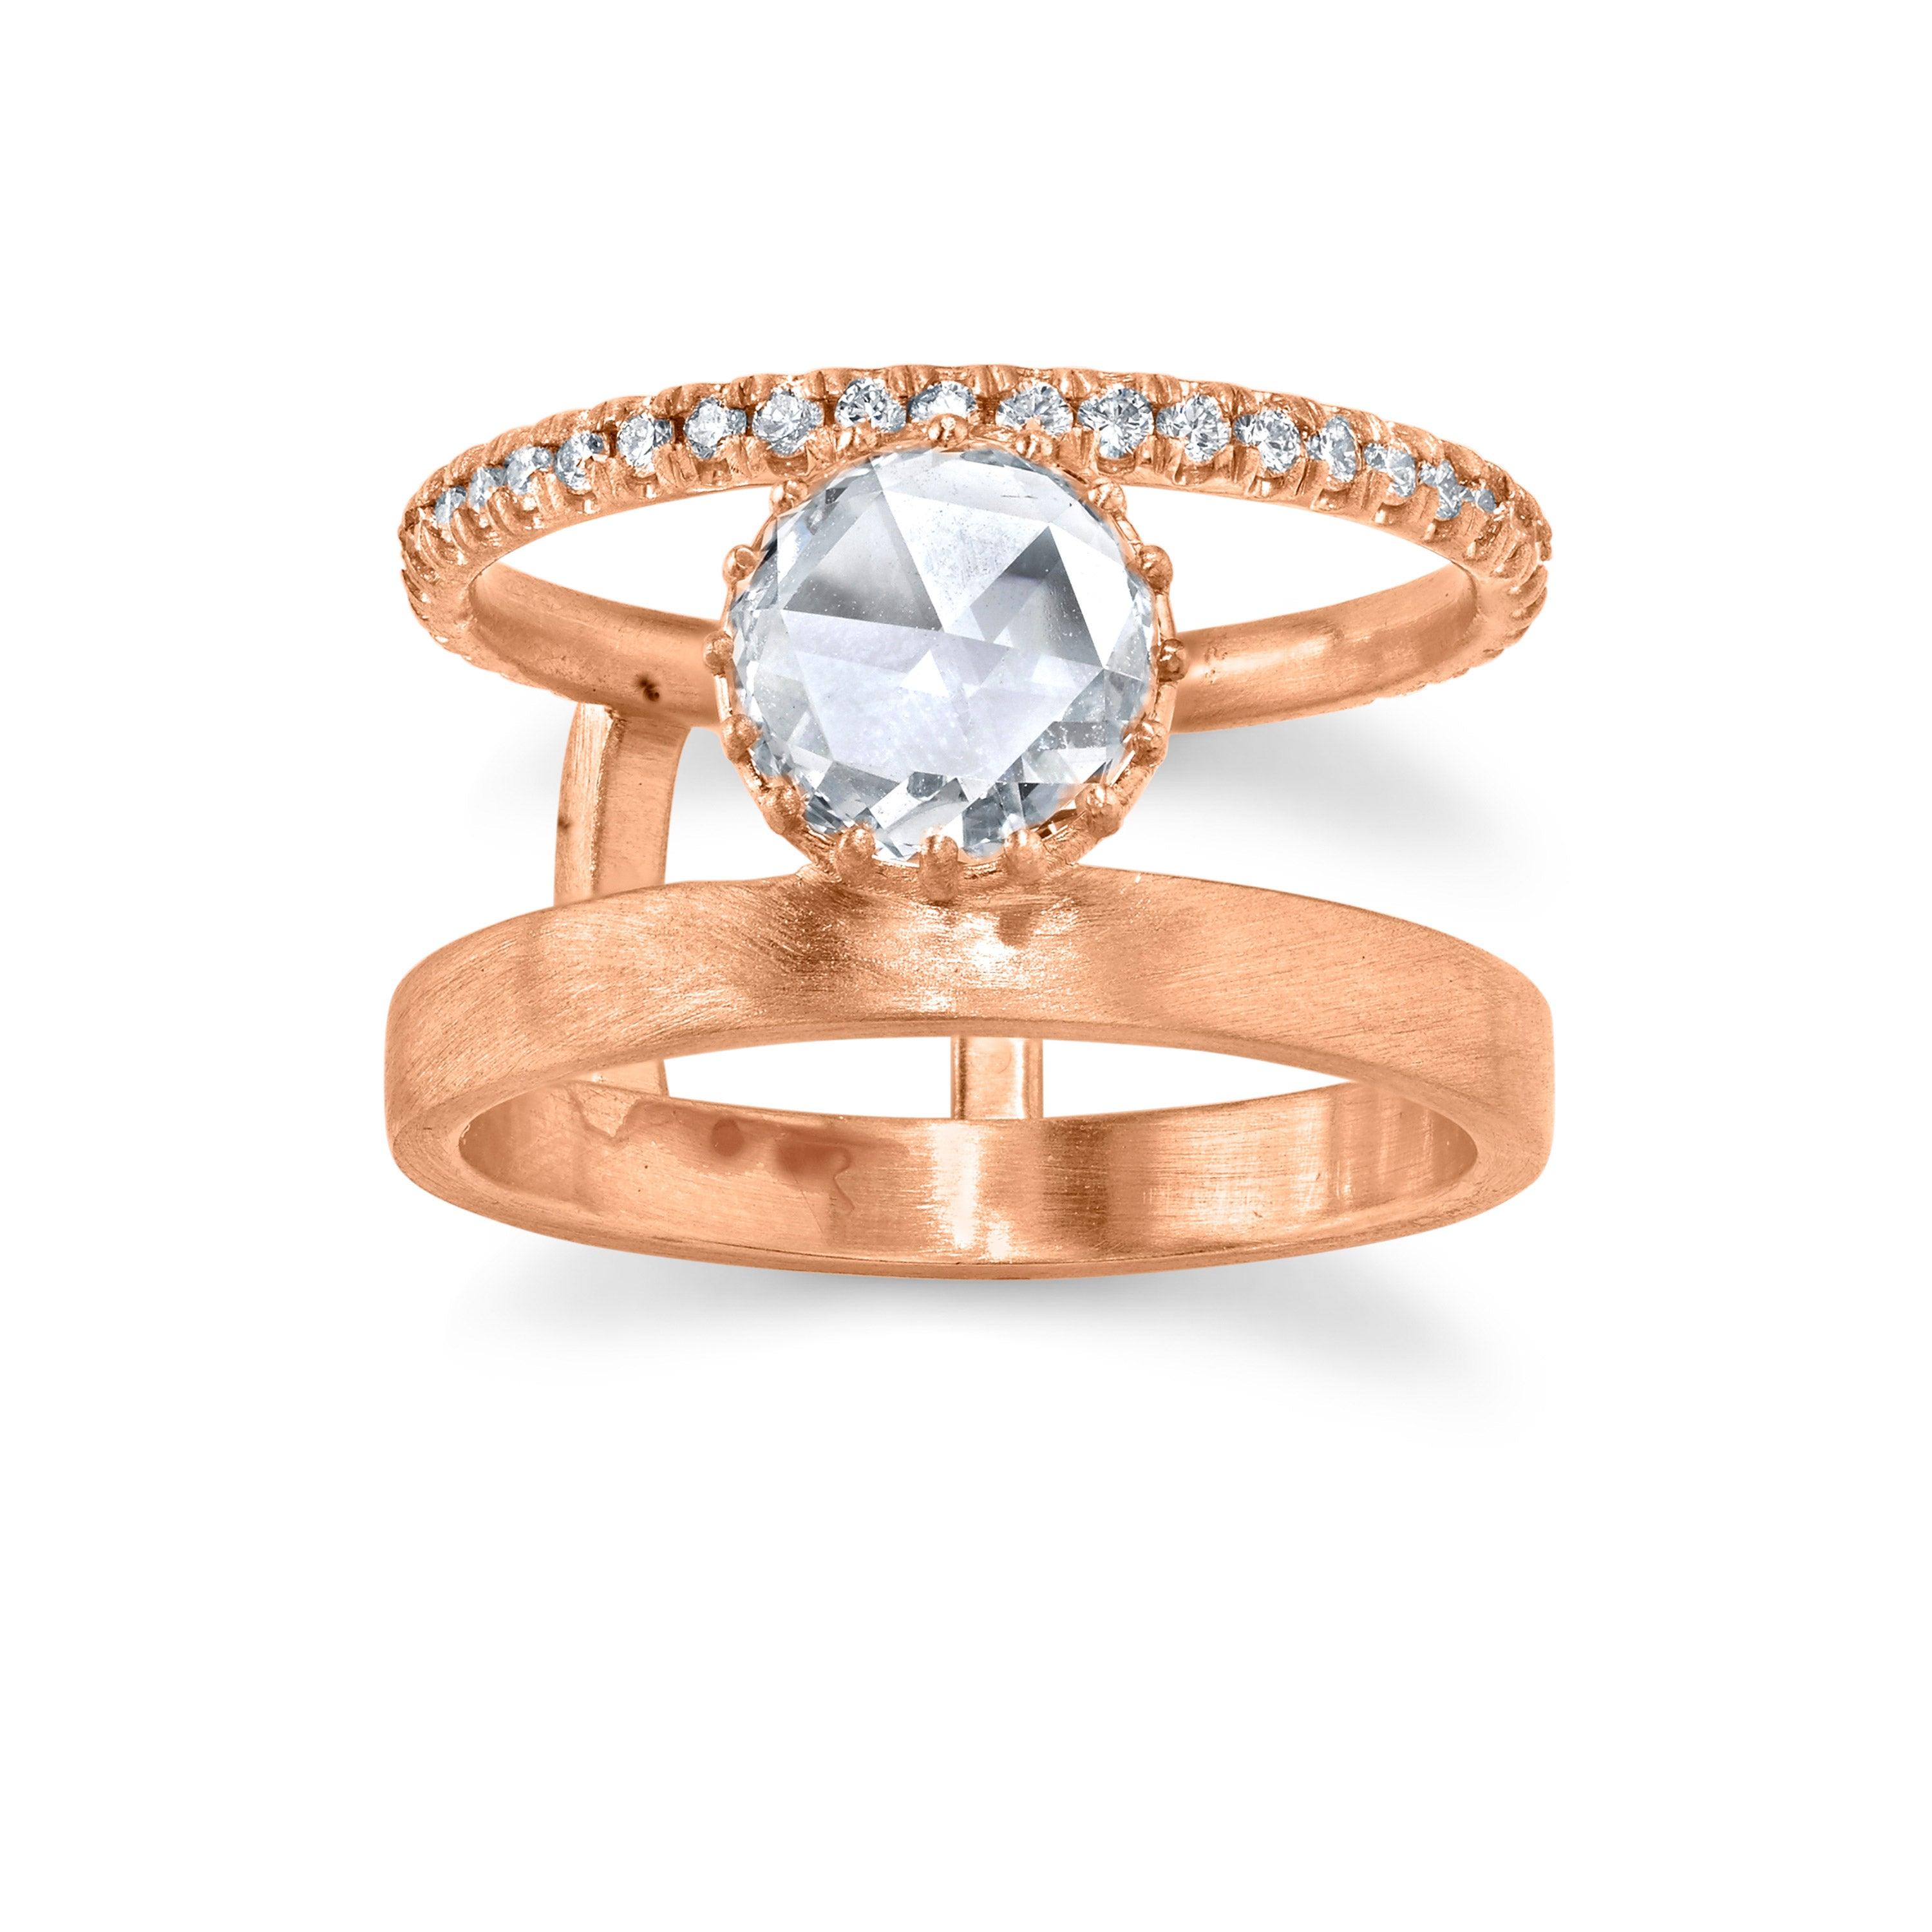 Lady's Engagement Ring – Welling & Co. Jewelers